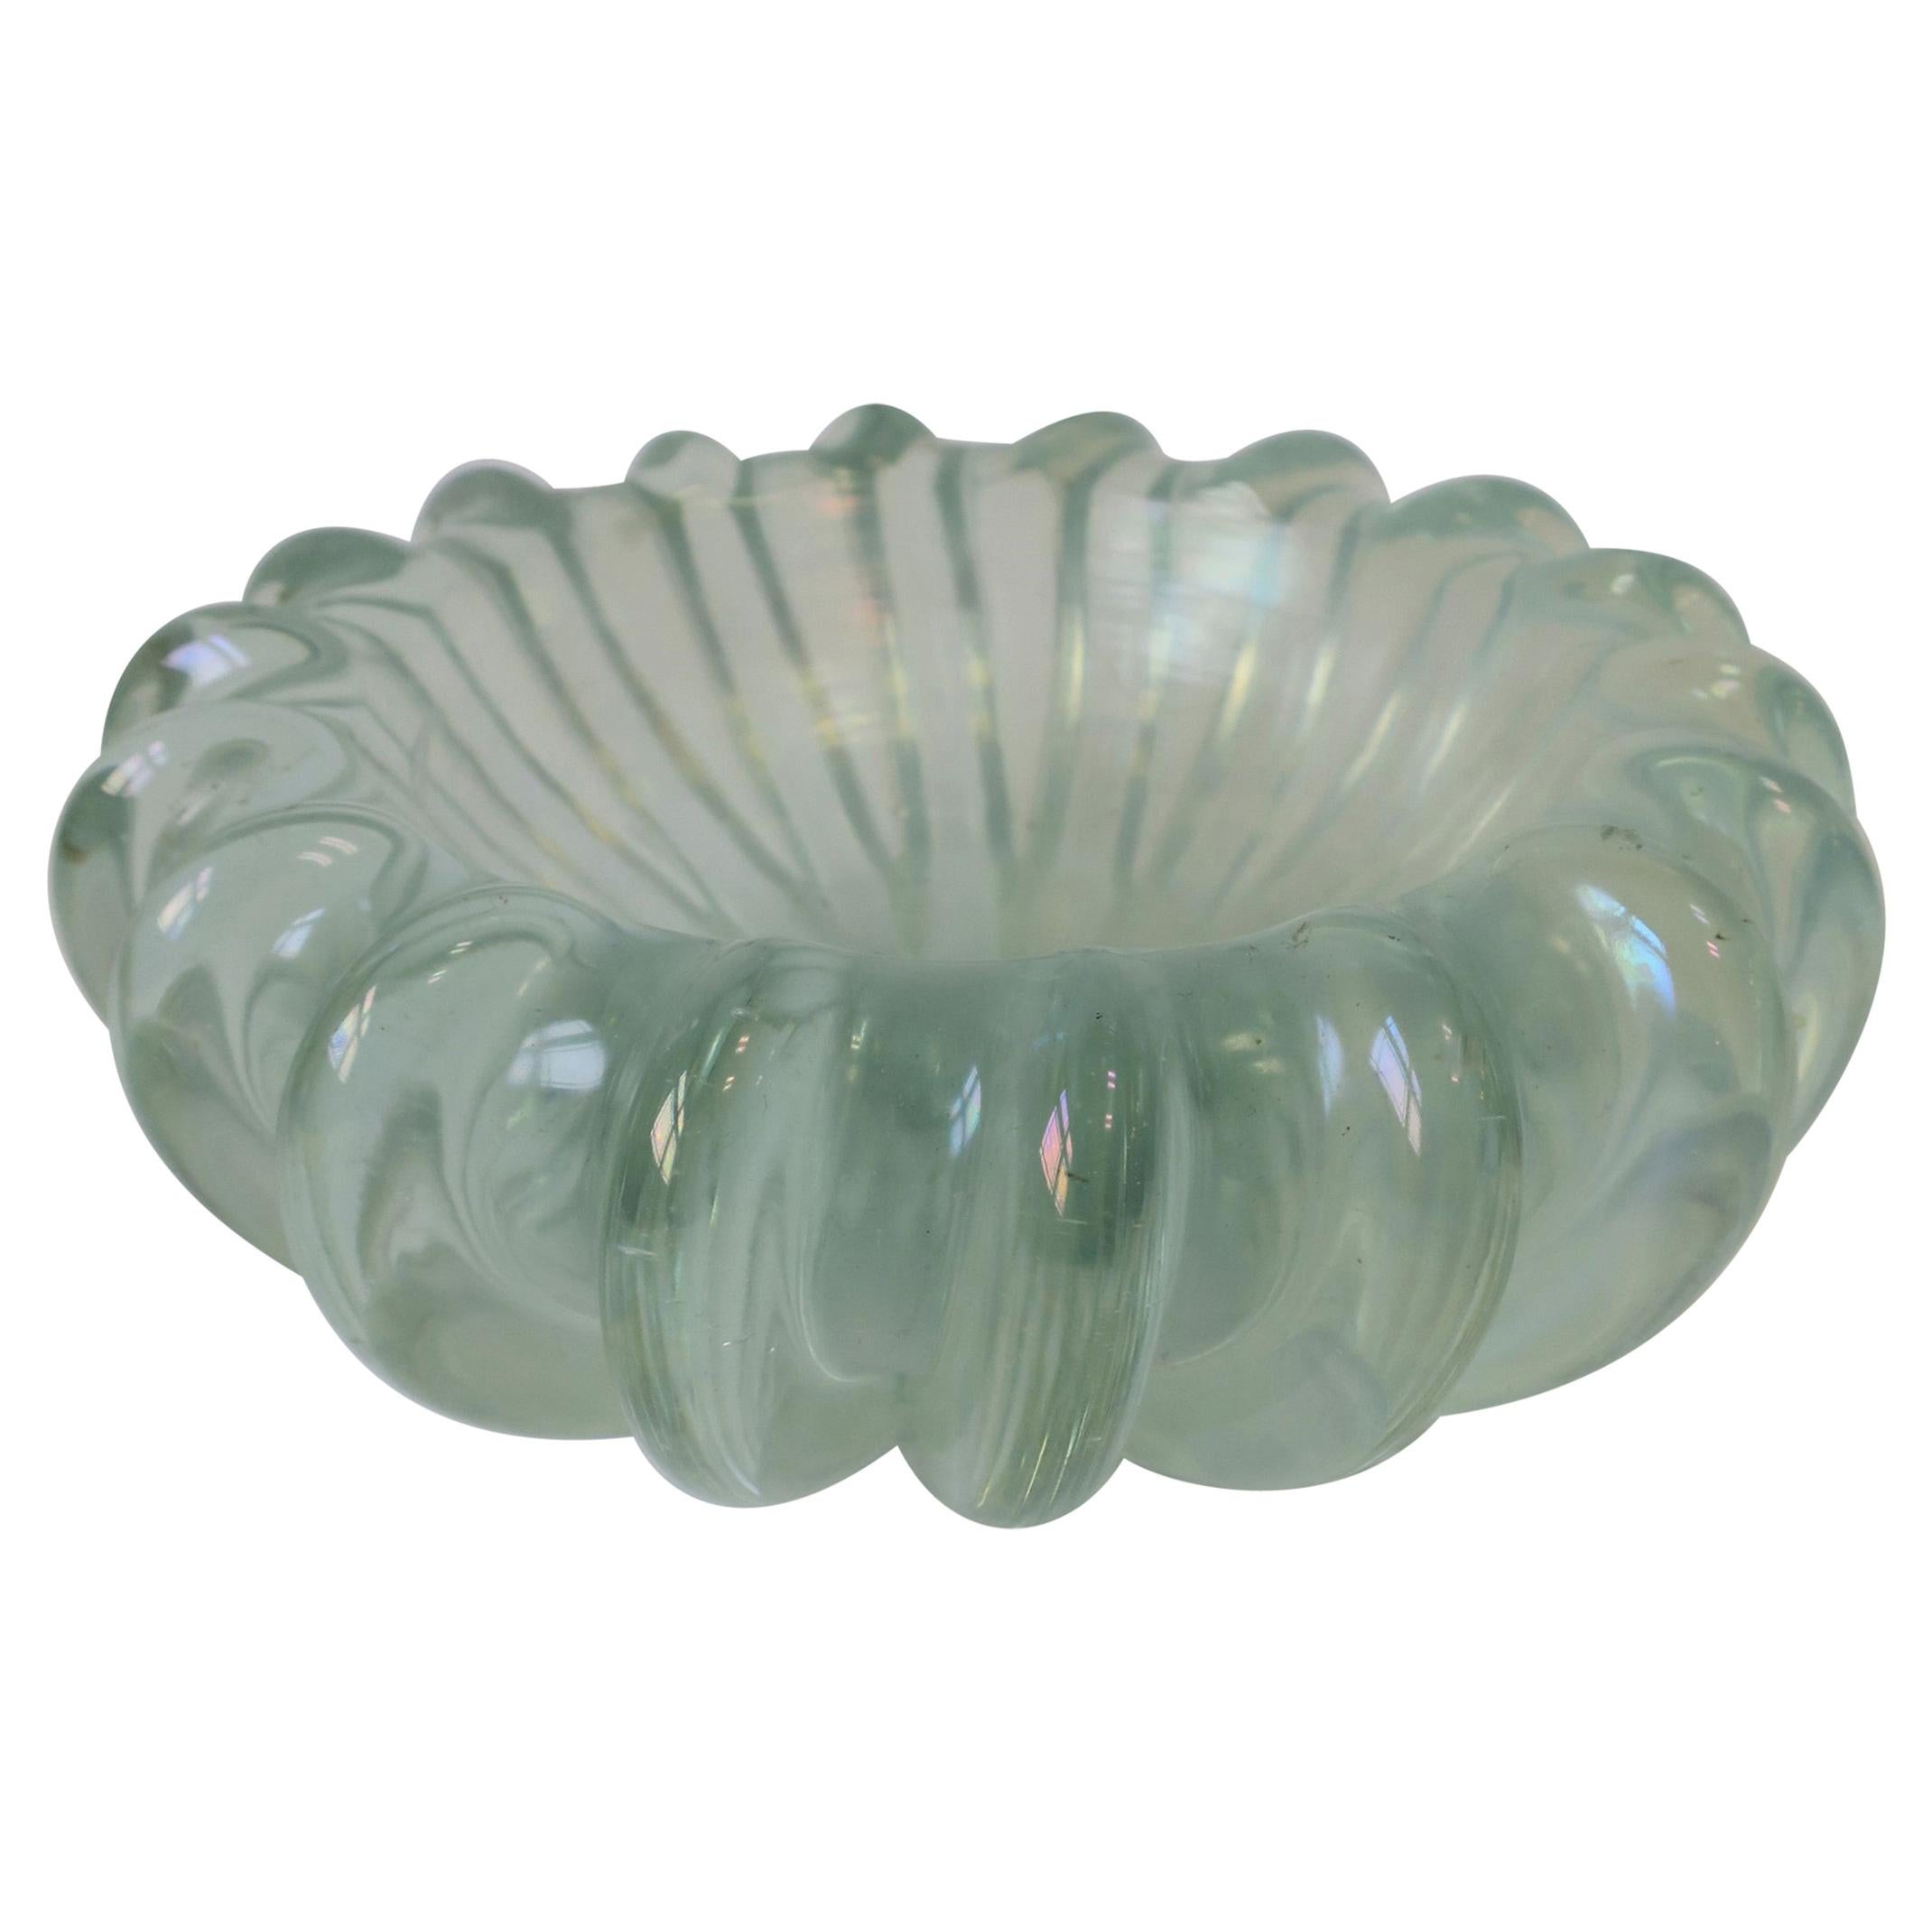 Italian Murano Art Glass Bowl with Iridescent Hue and Fluted Design